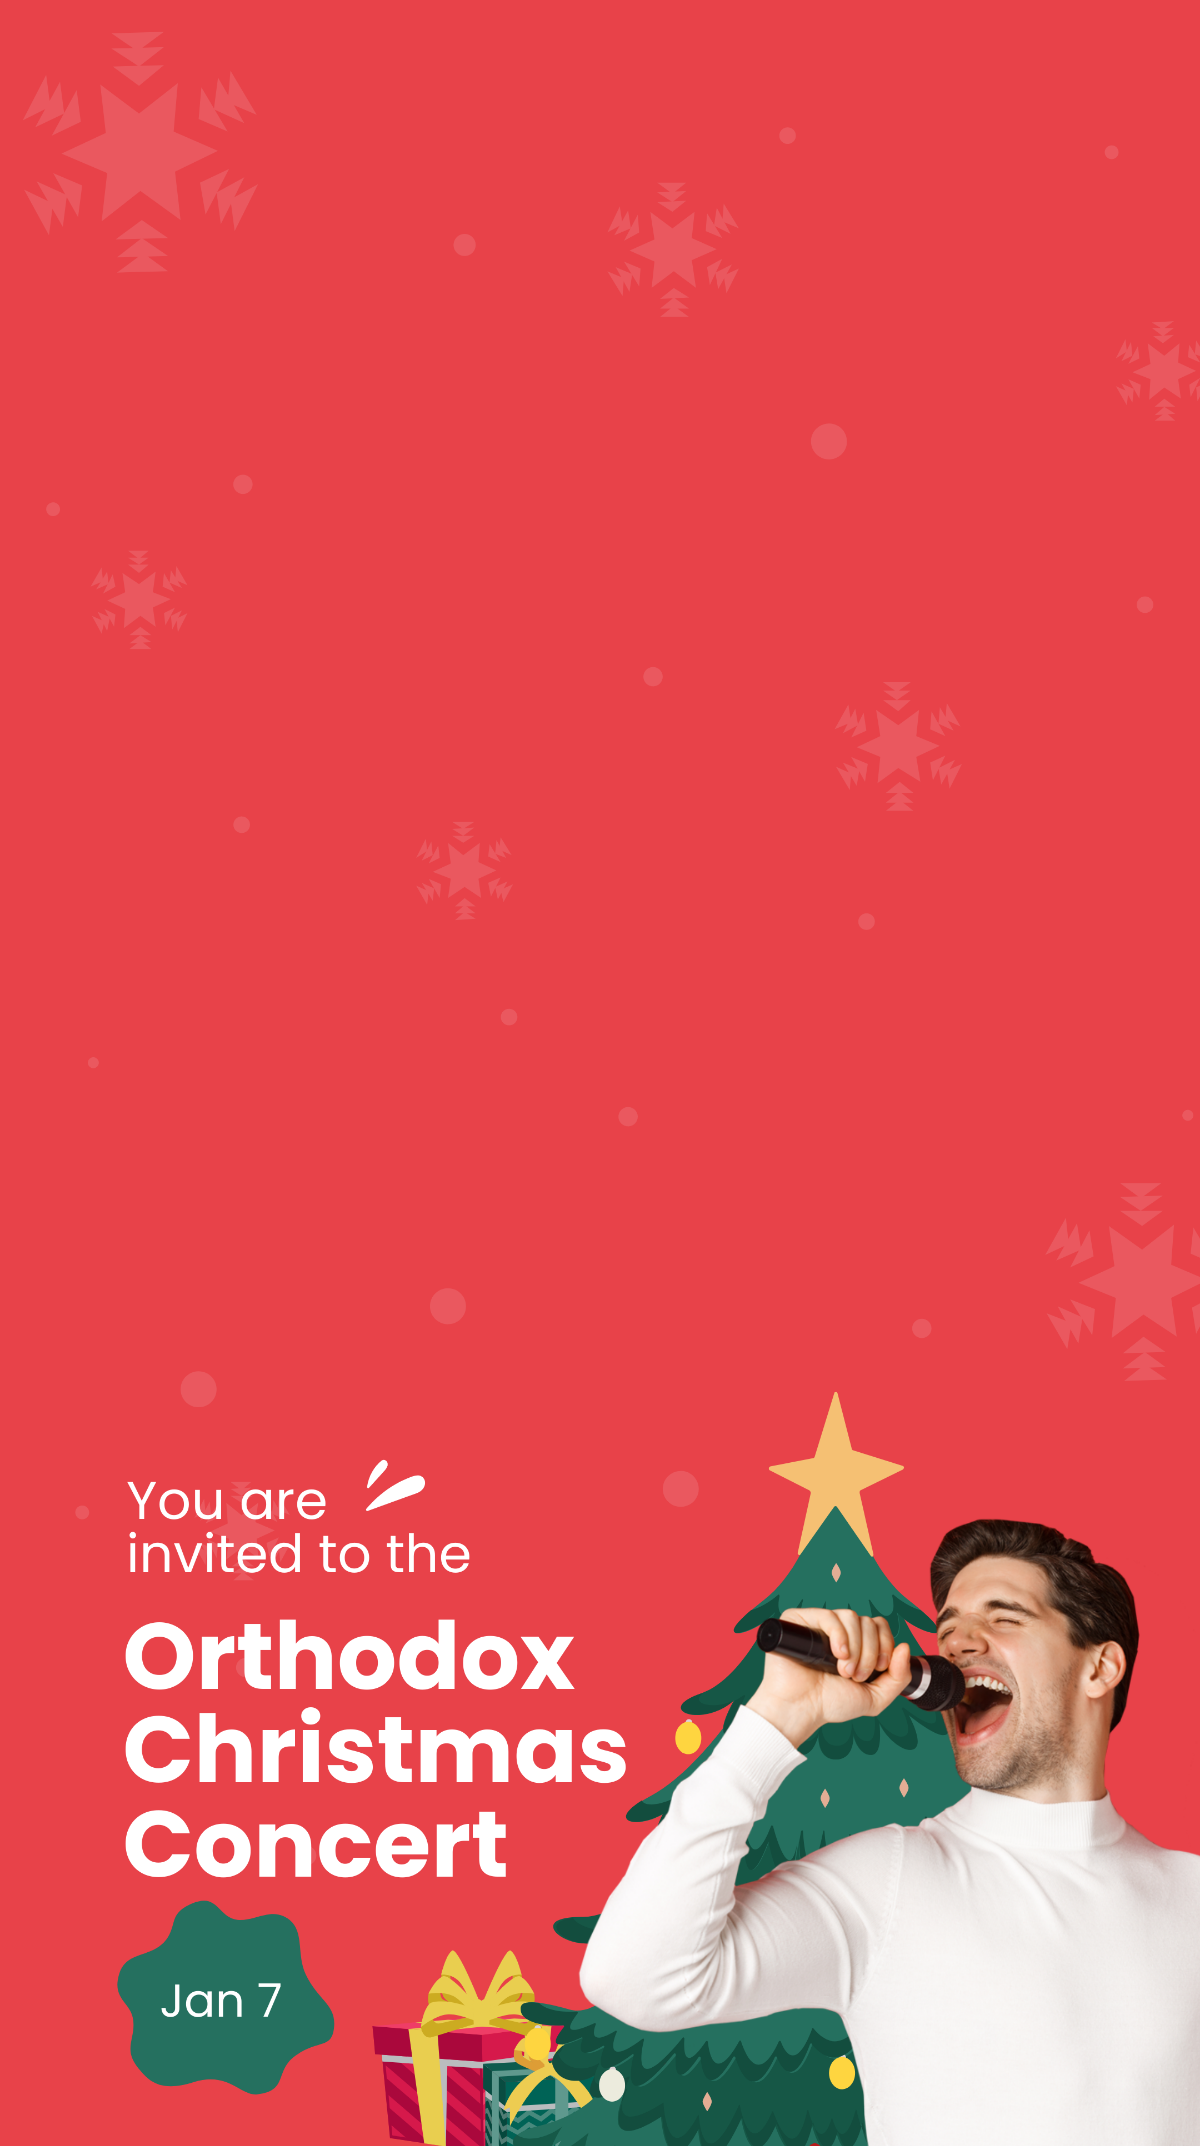 Orthodox Christmas Concert Snapchat Geofilter Template